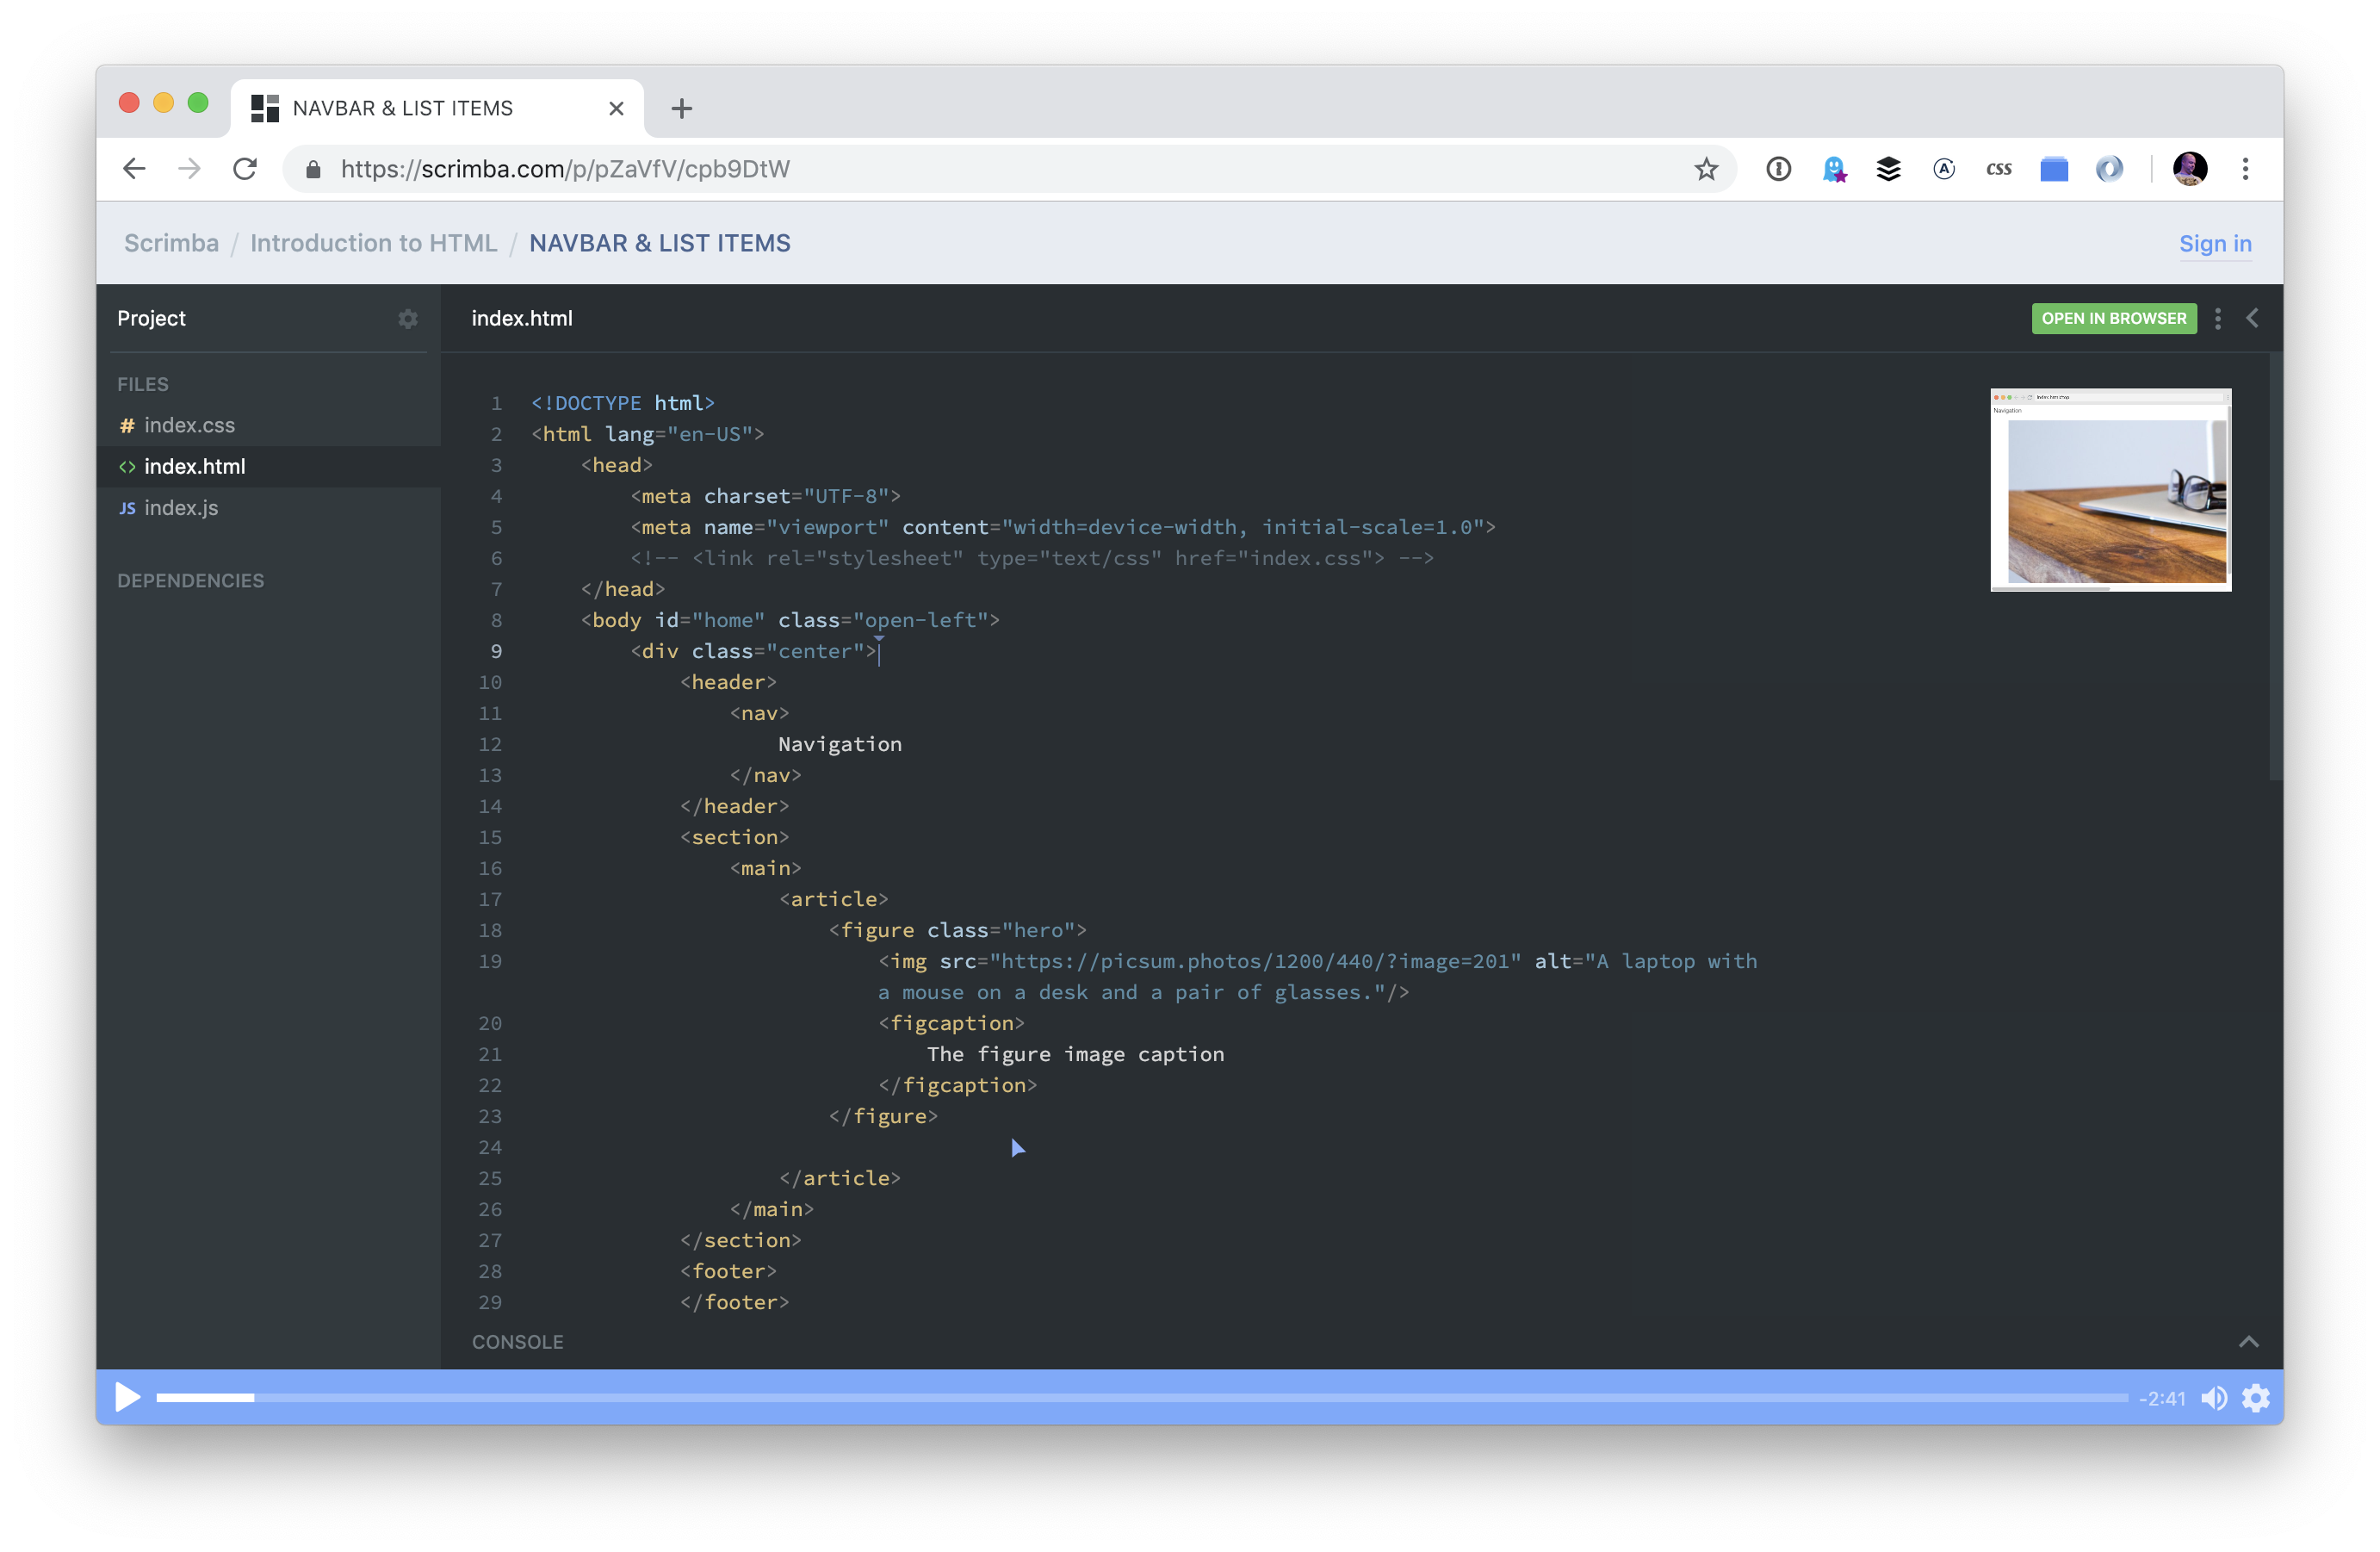 A screenshot of the Scrimba course. It resembles a code editor with a dark gray background, sidebar outlining web assets, and an editor with code in the main area.